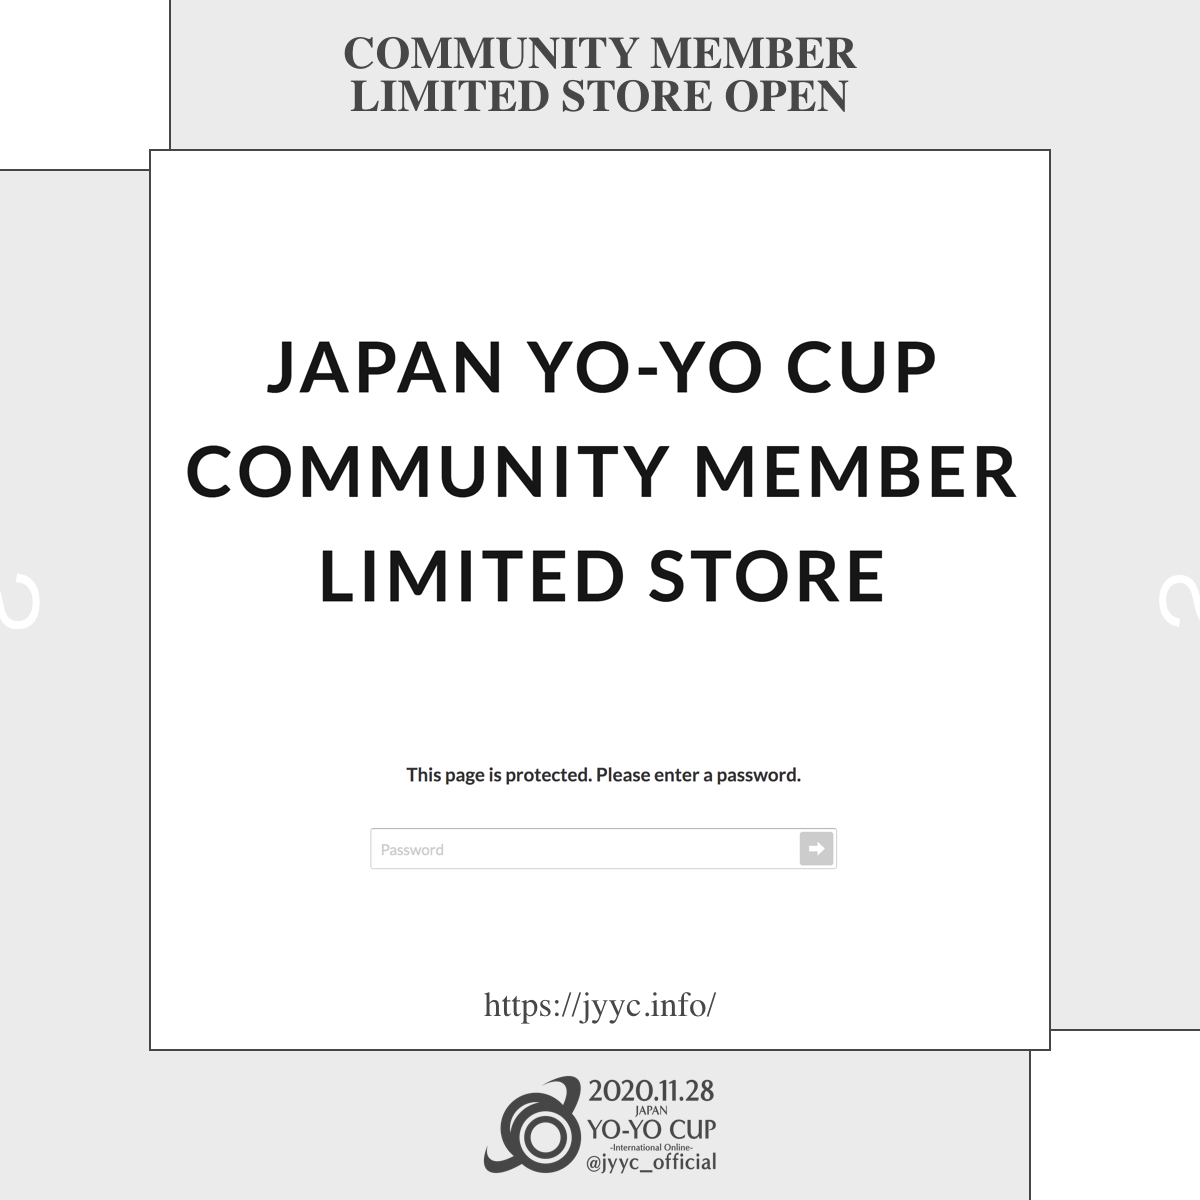 “JAPAN YO-YO CUP” コミュニティ会員限定クリスマスセール開催！ / Christmas Sale for Community Members Only!